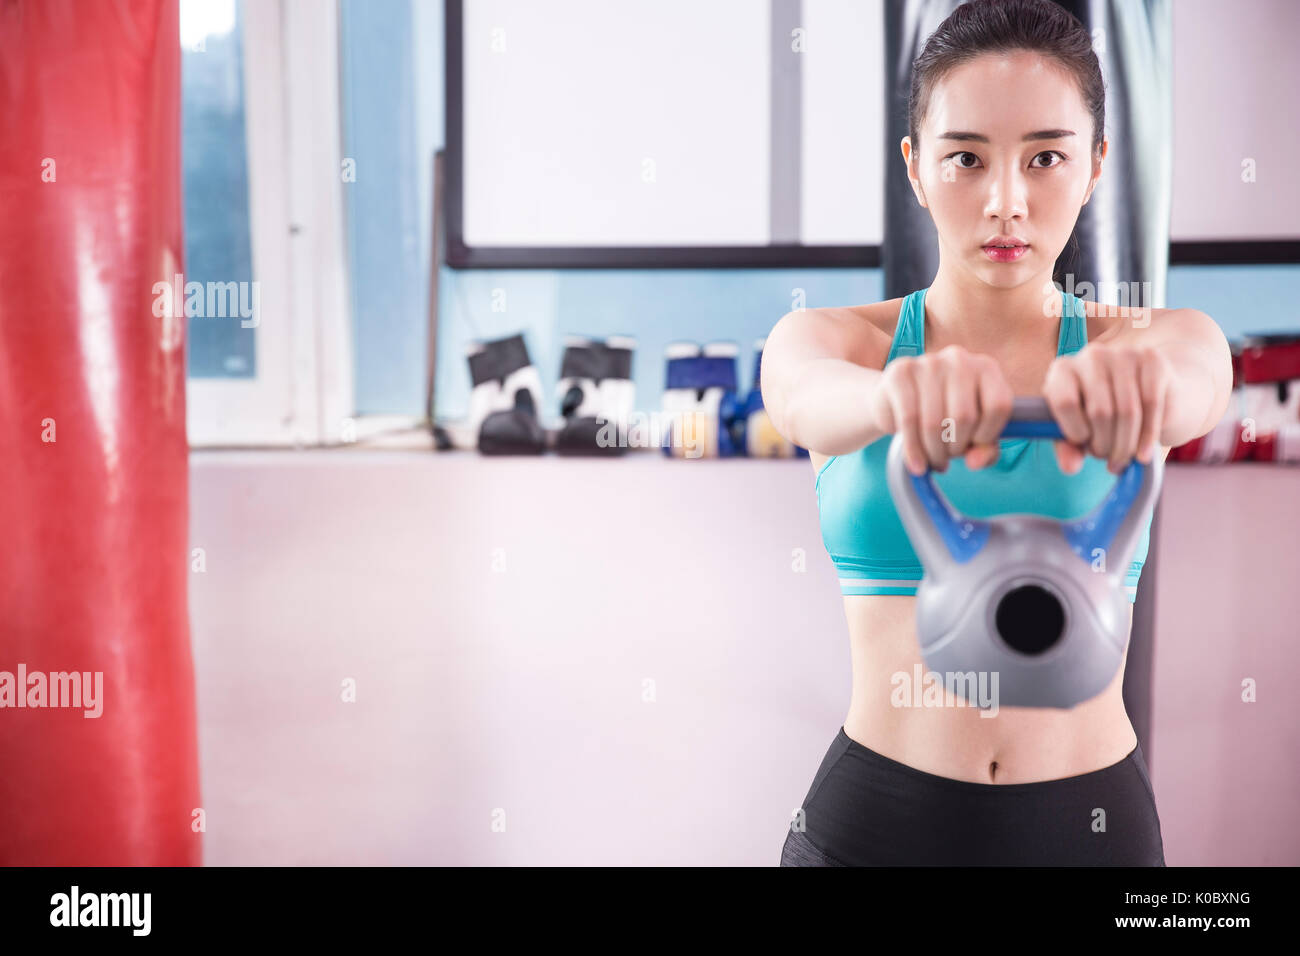 Young woman in sportswear exercising at gym Stock Photo